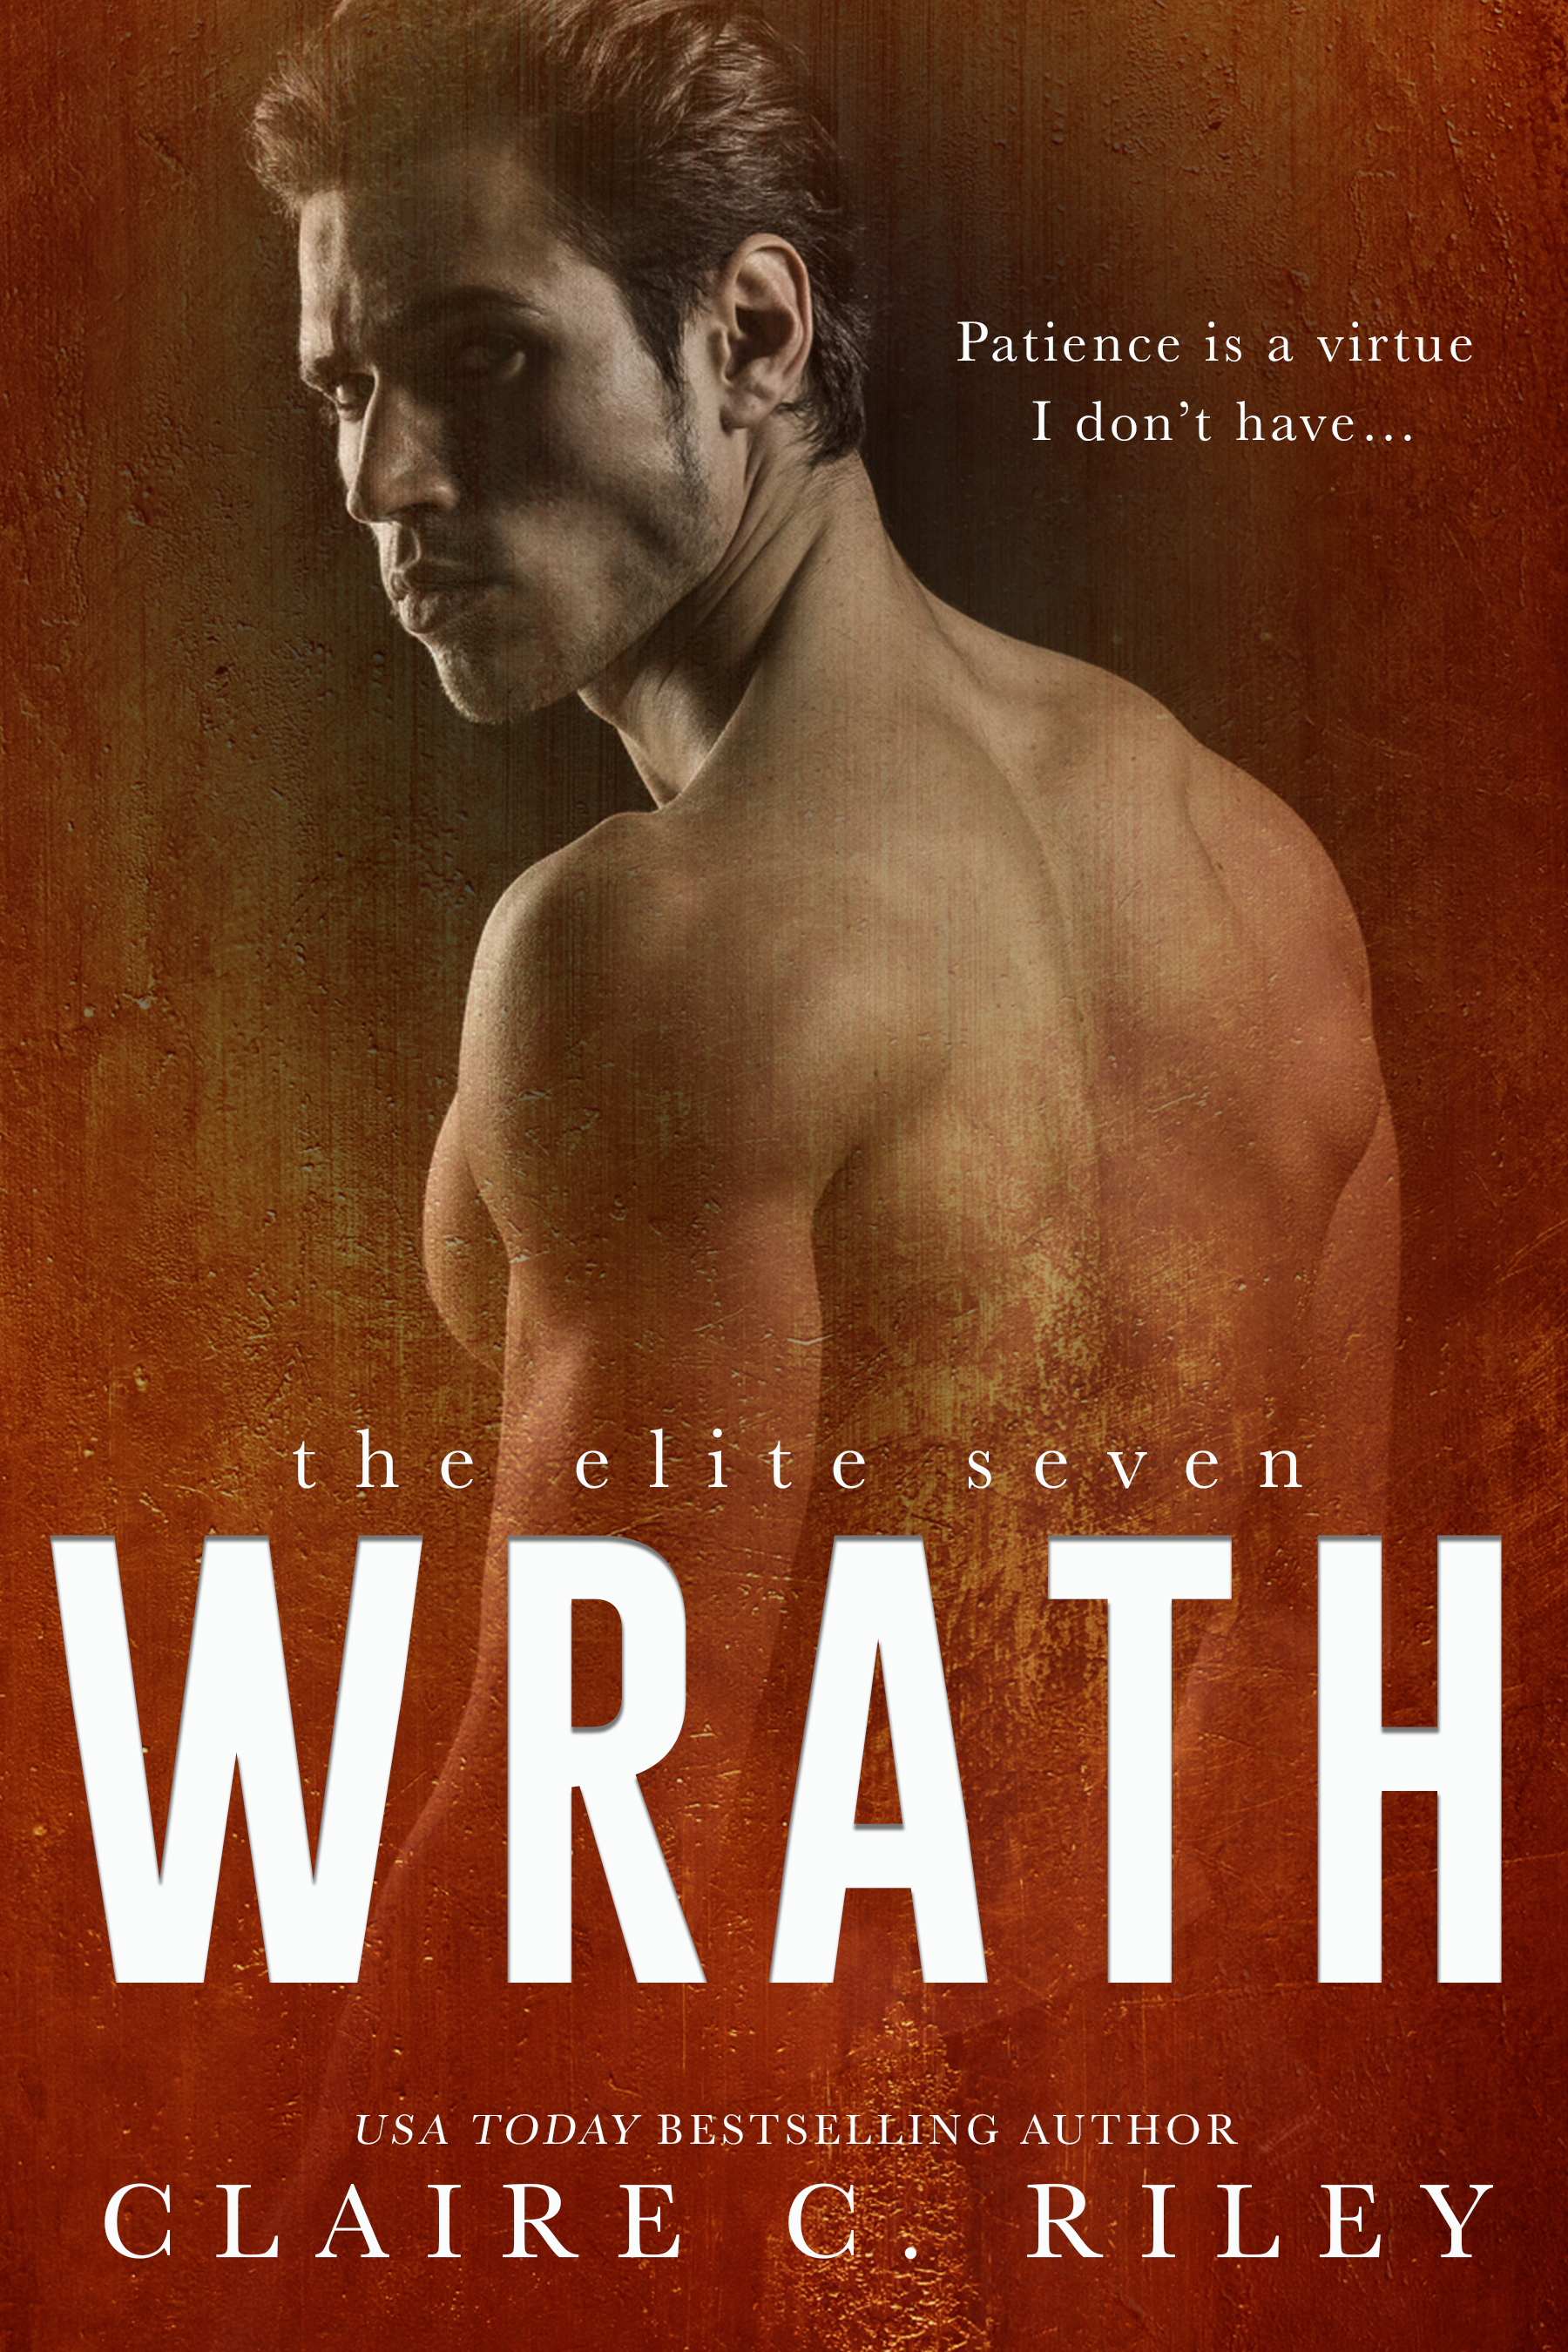 Wrath by Claire C. Riley [Review]